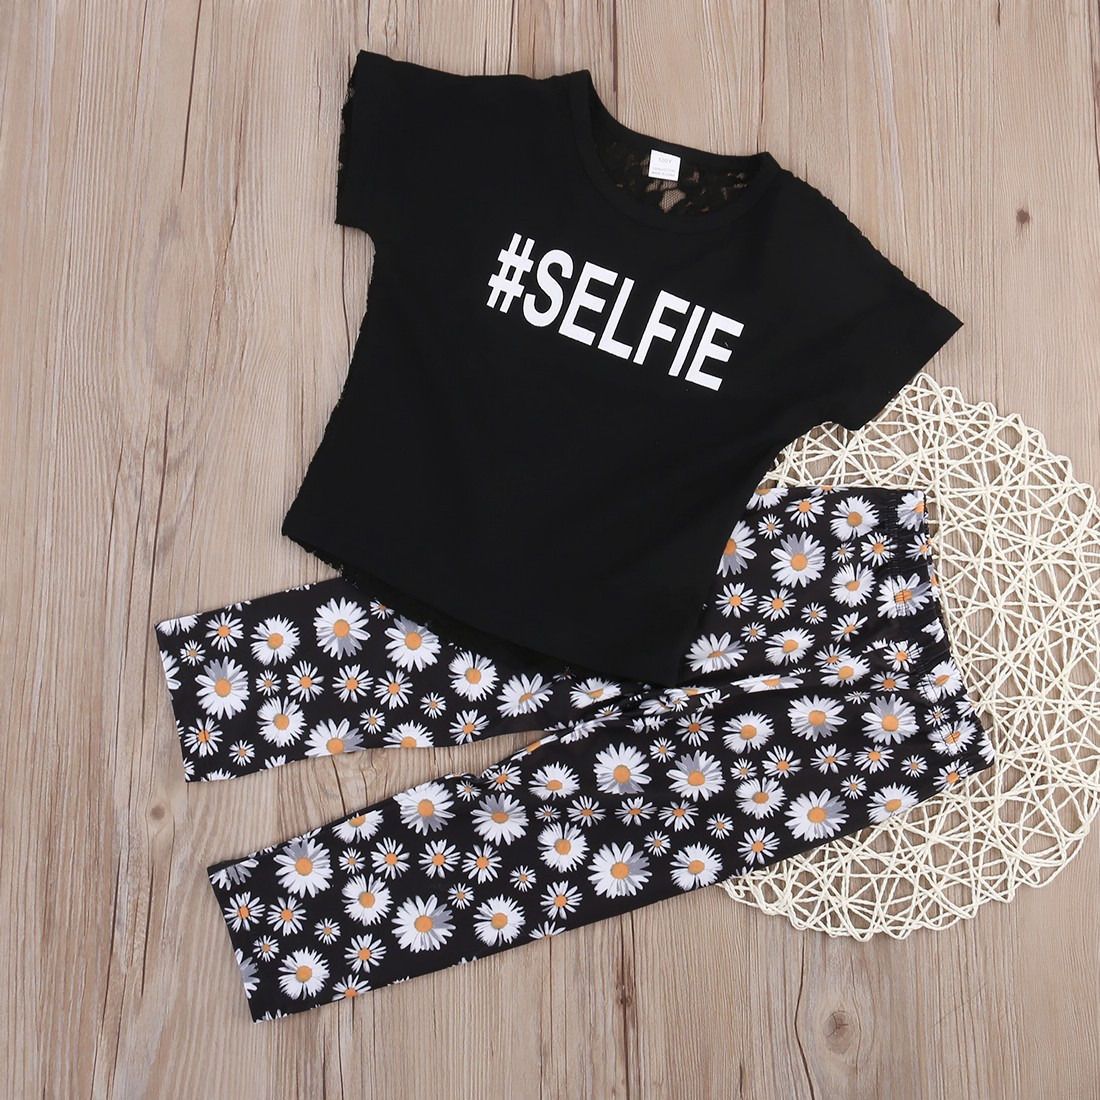 2020 2017 Fashion Sweet Princess Kids Baby Girls Clothing Sets Casual Black T Shirt Pants Suits Flower Pattern Children Clothes Set 2 7t From Tyfactory 5 27 Dhgate Com - princess roblox shirt